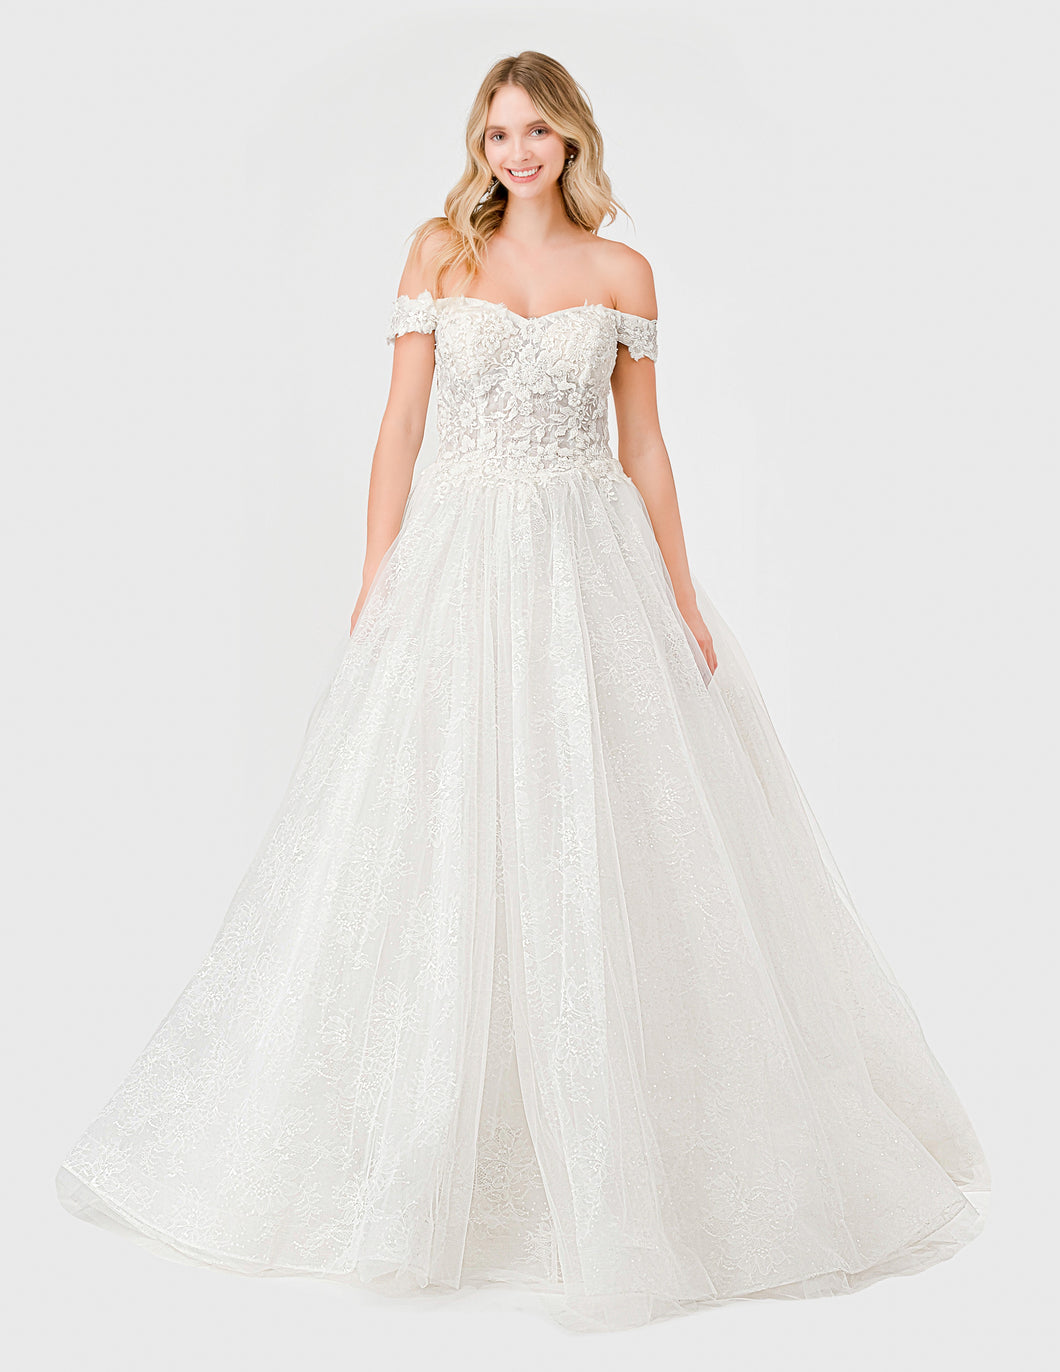 Off-White One Shoulder Lace Wedding Dress